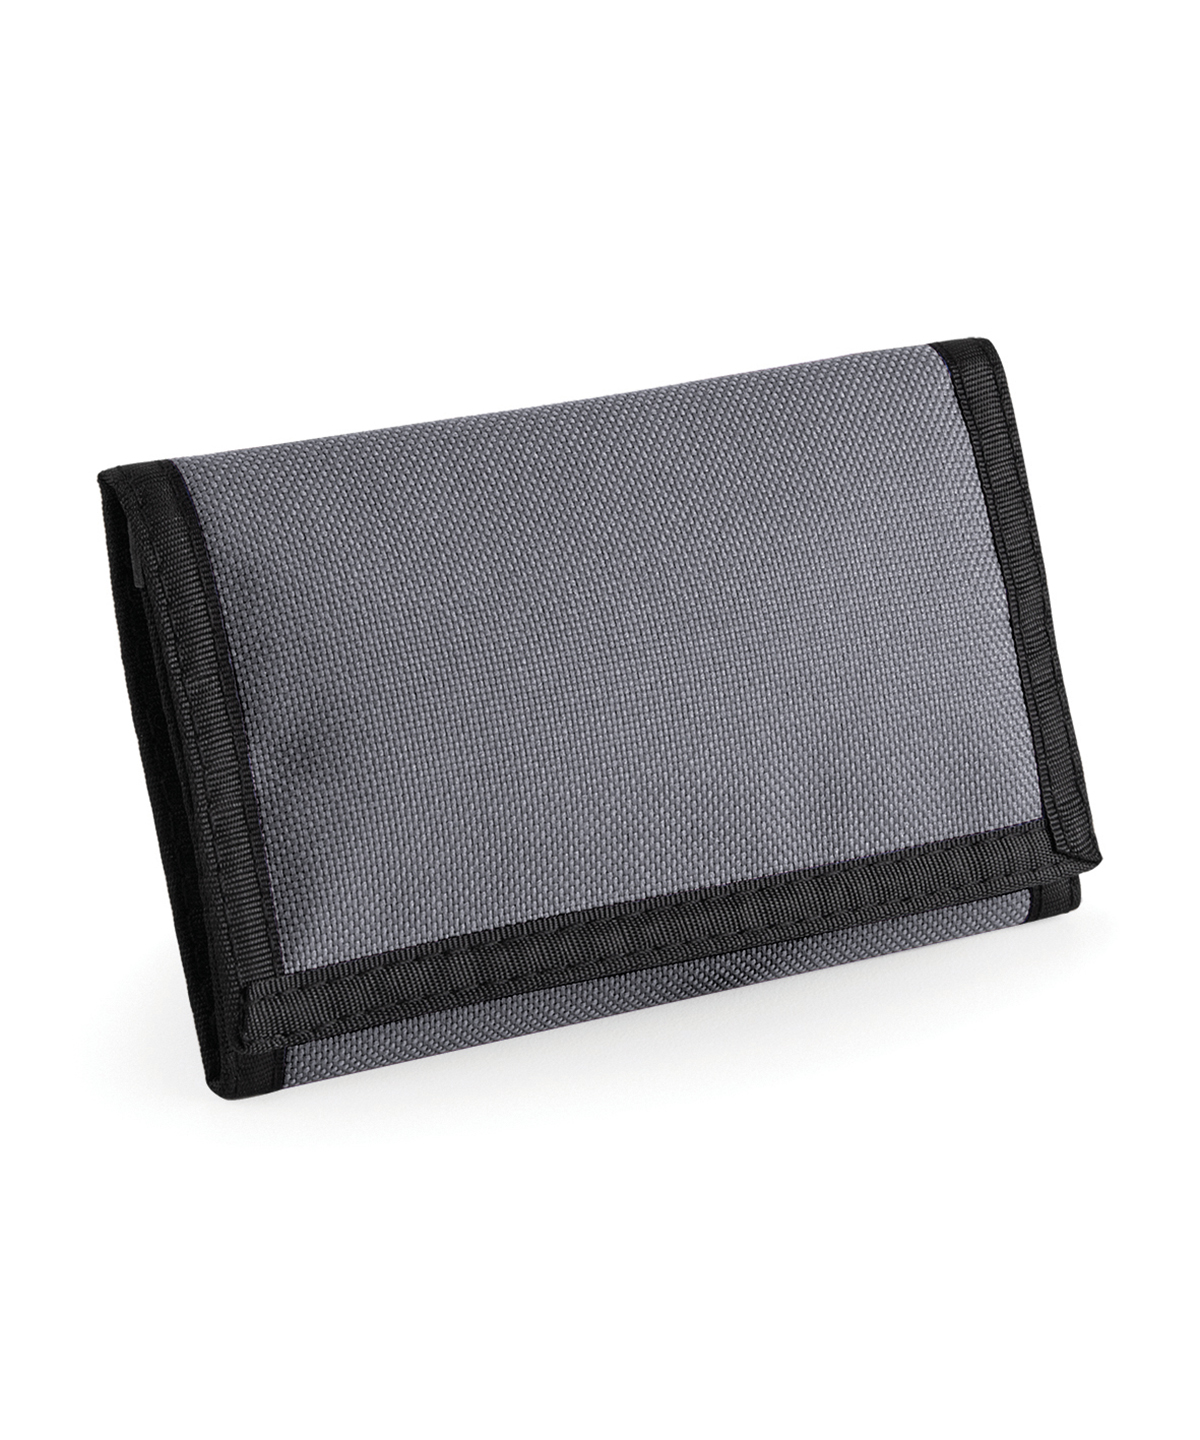 Ripper Wallet Graphite Grey Size One Size